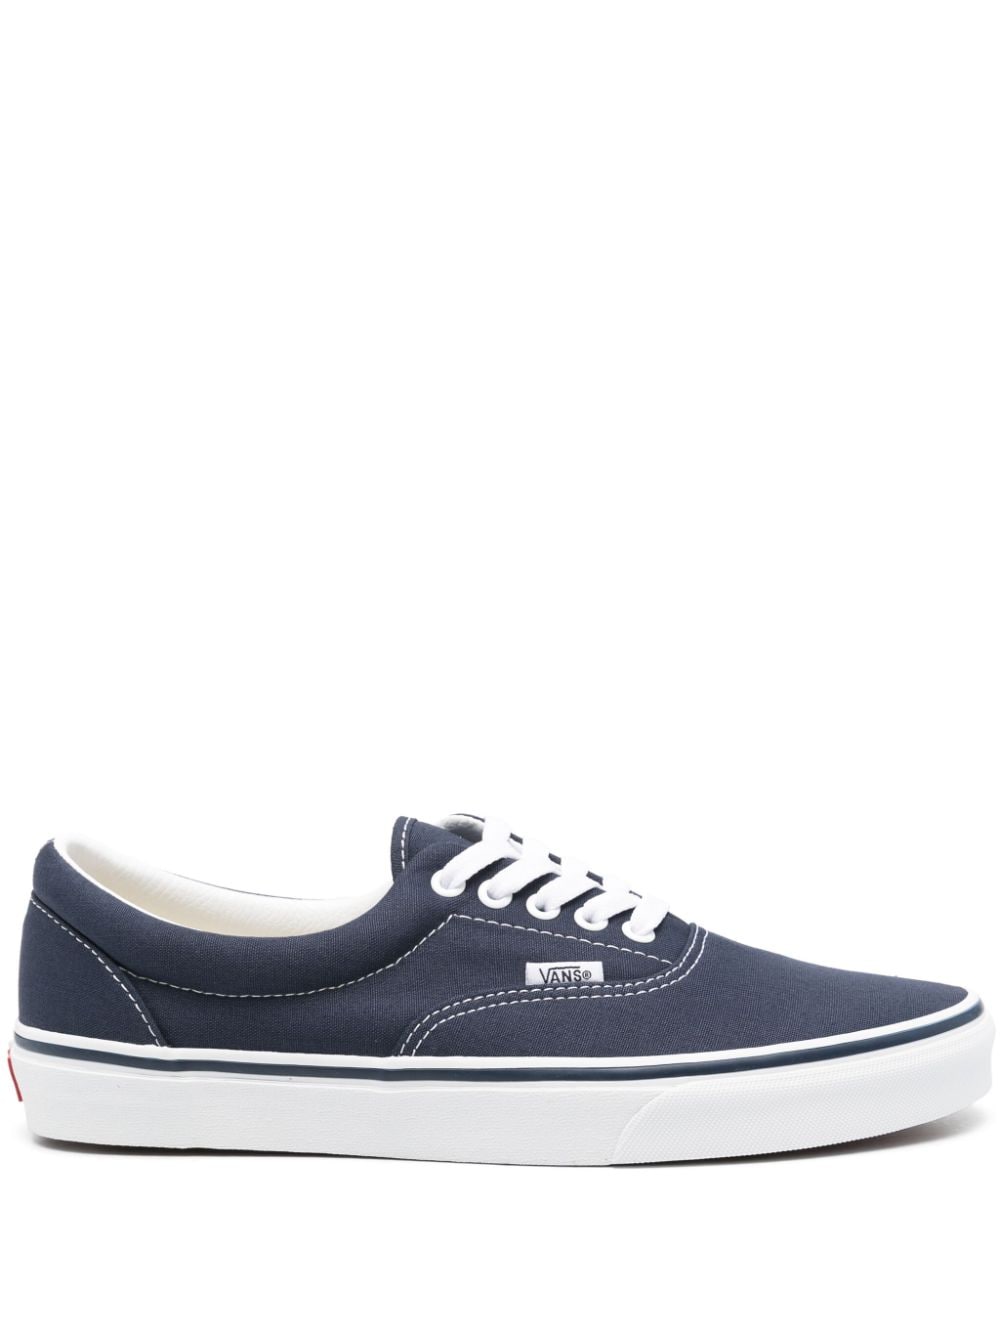 Vans Authentic Canvas Trainers In Blue